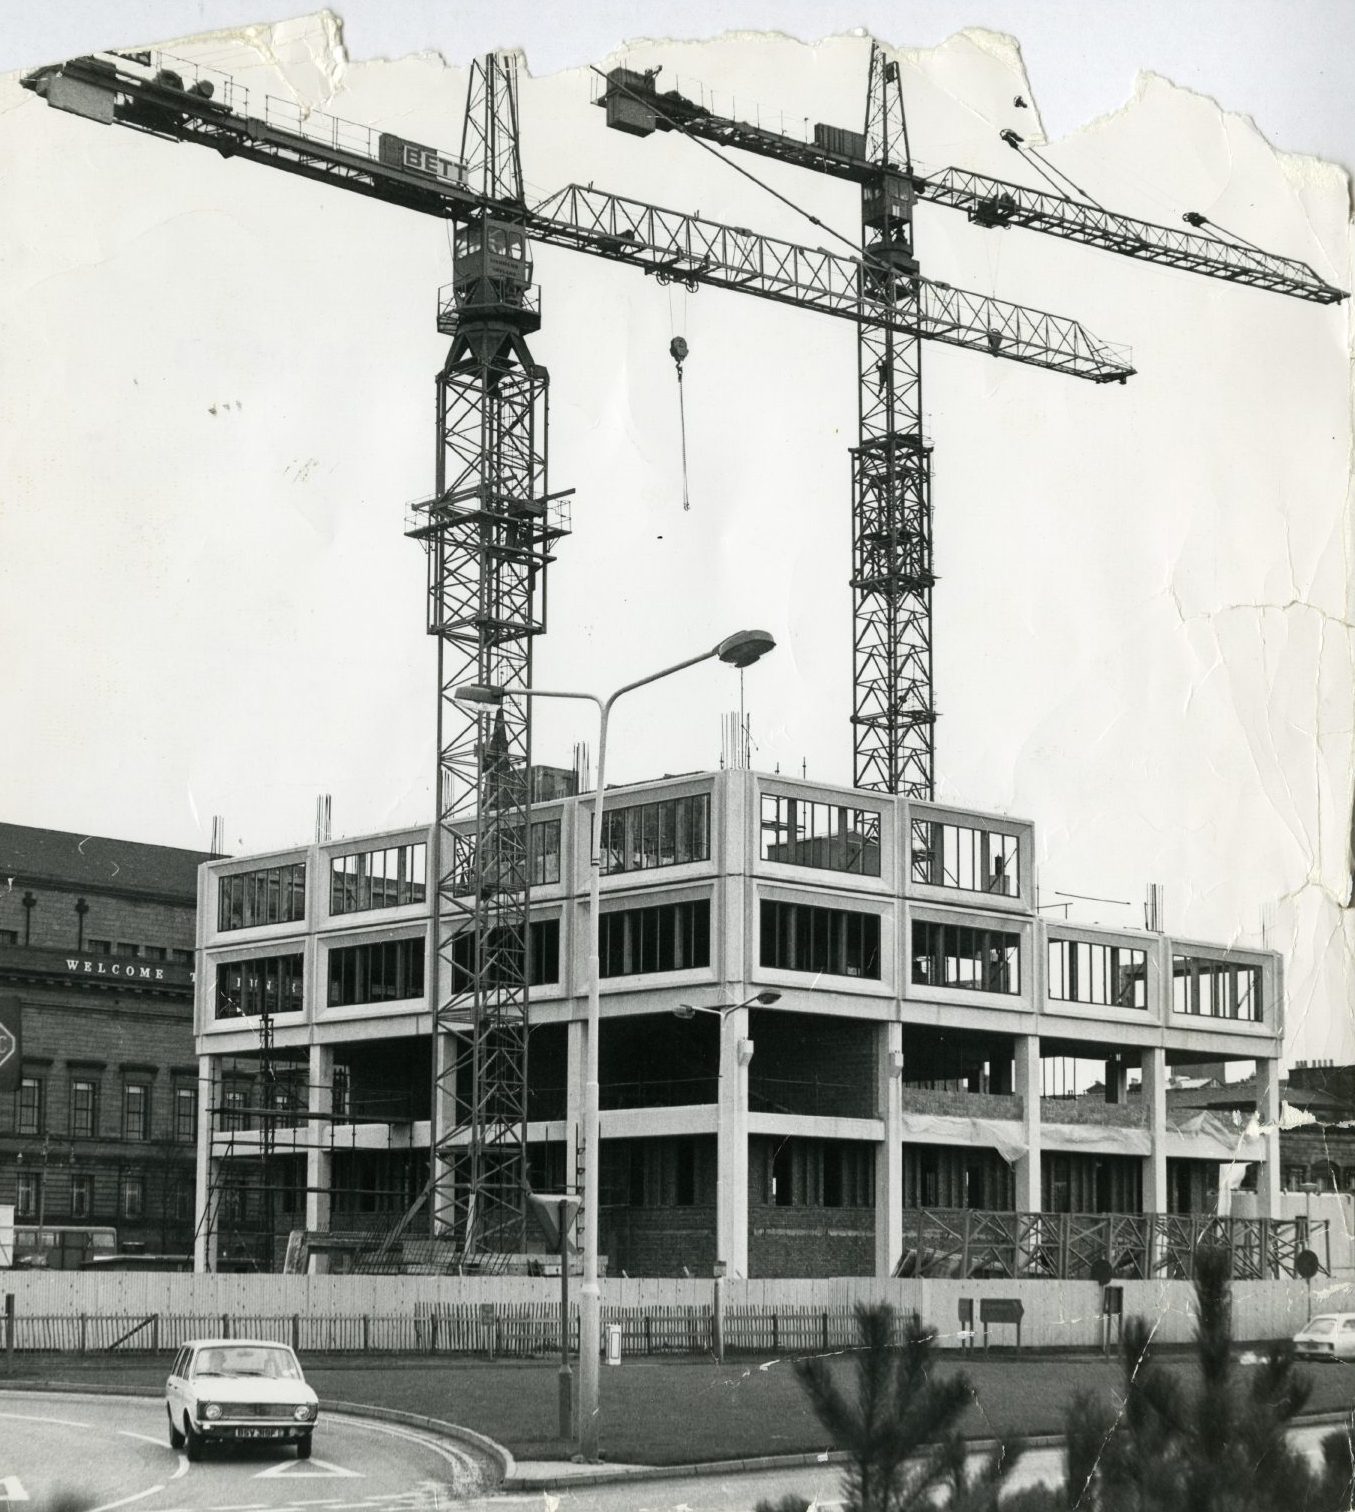 Two cranes tower over the Tayside House site, which is pictured under construction in January 1974.